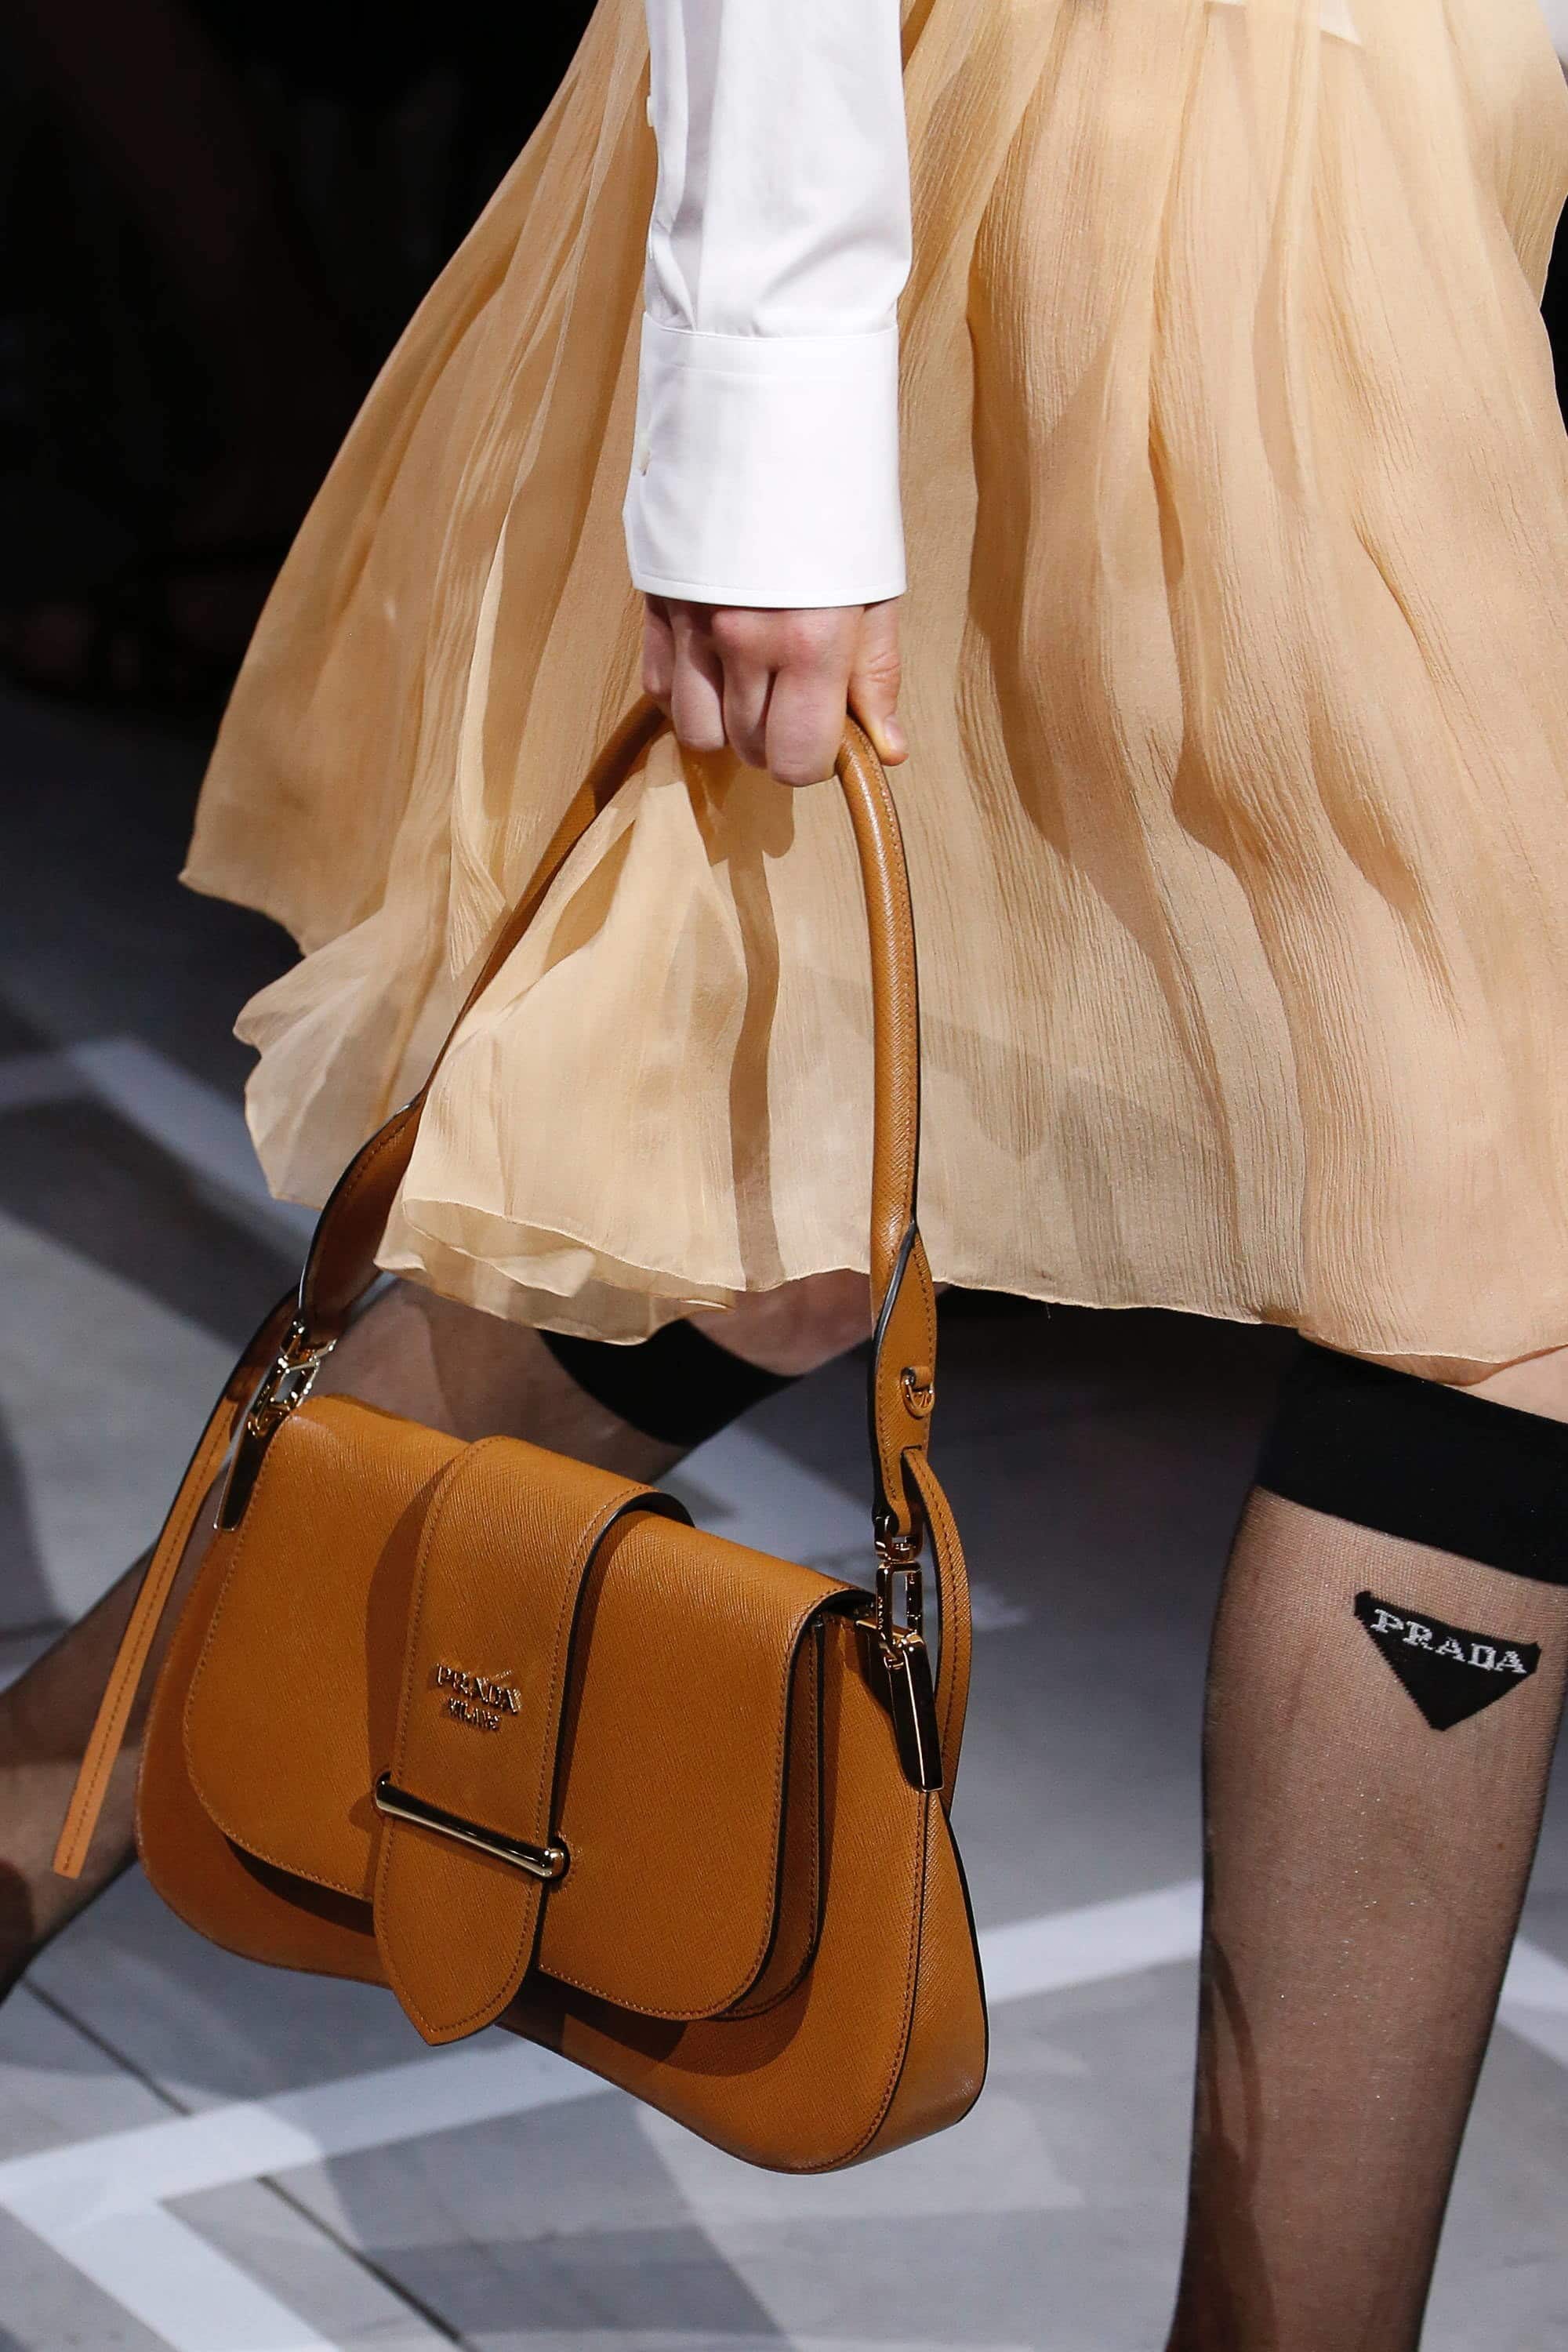 Prada Spring/Summer 2022 Runway Bags Collection - Spotted Fashion